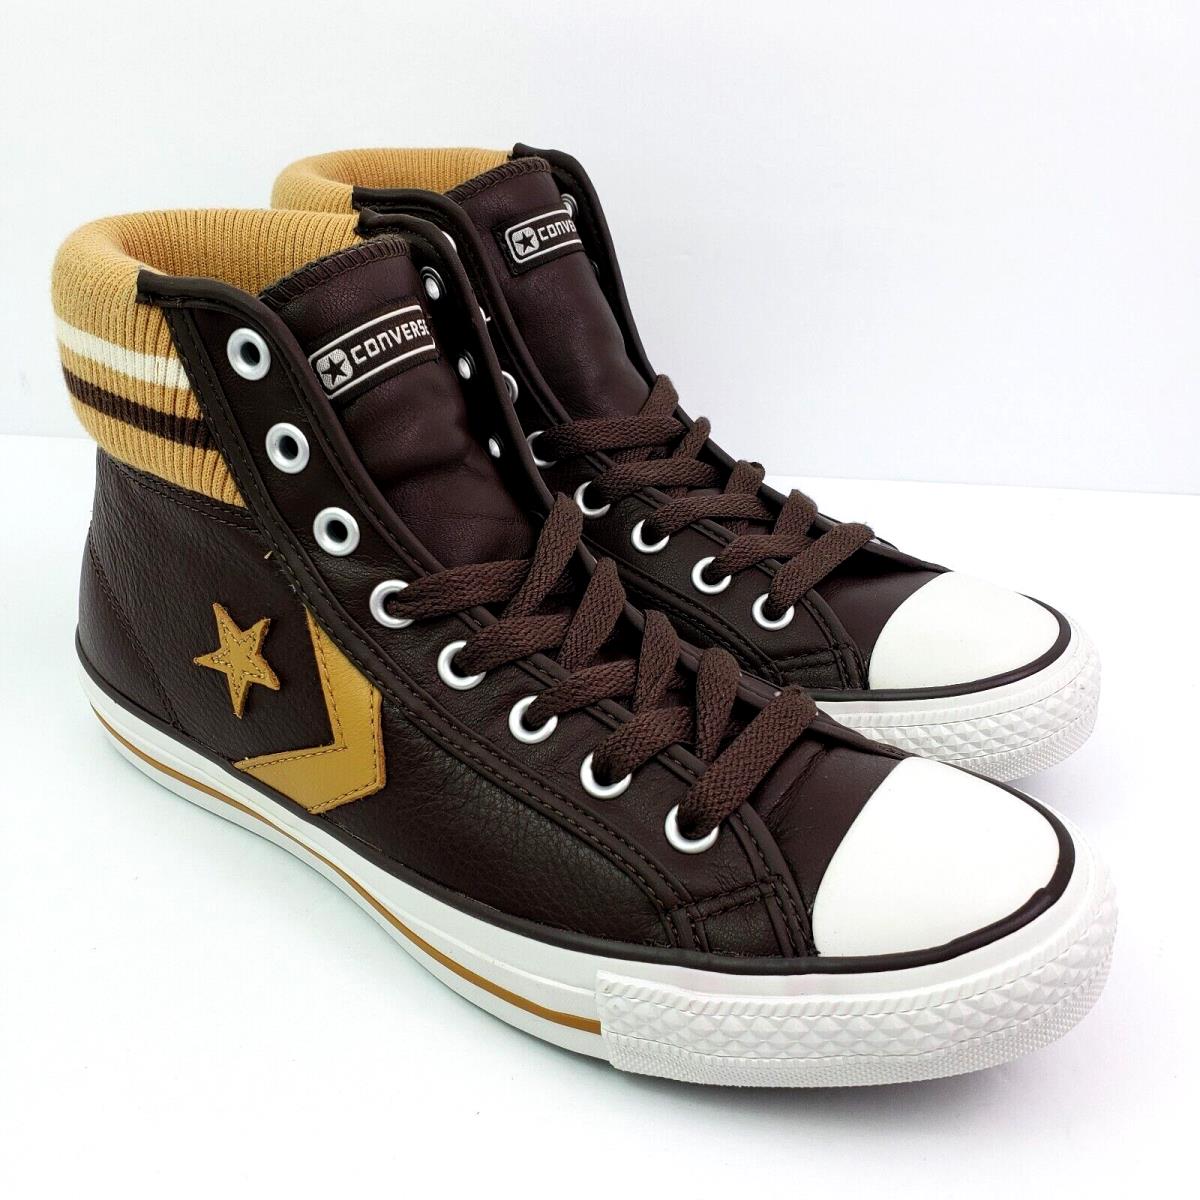 Converse Star Plyr Cuff Mid Mens Sz 8 Womens Sz 10 Brown Leather Sneaker Shoes